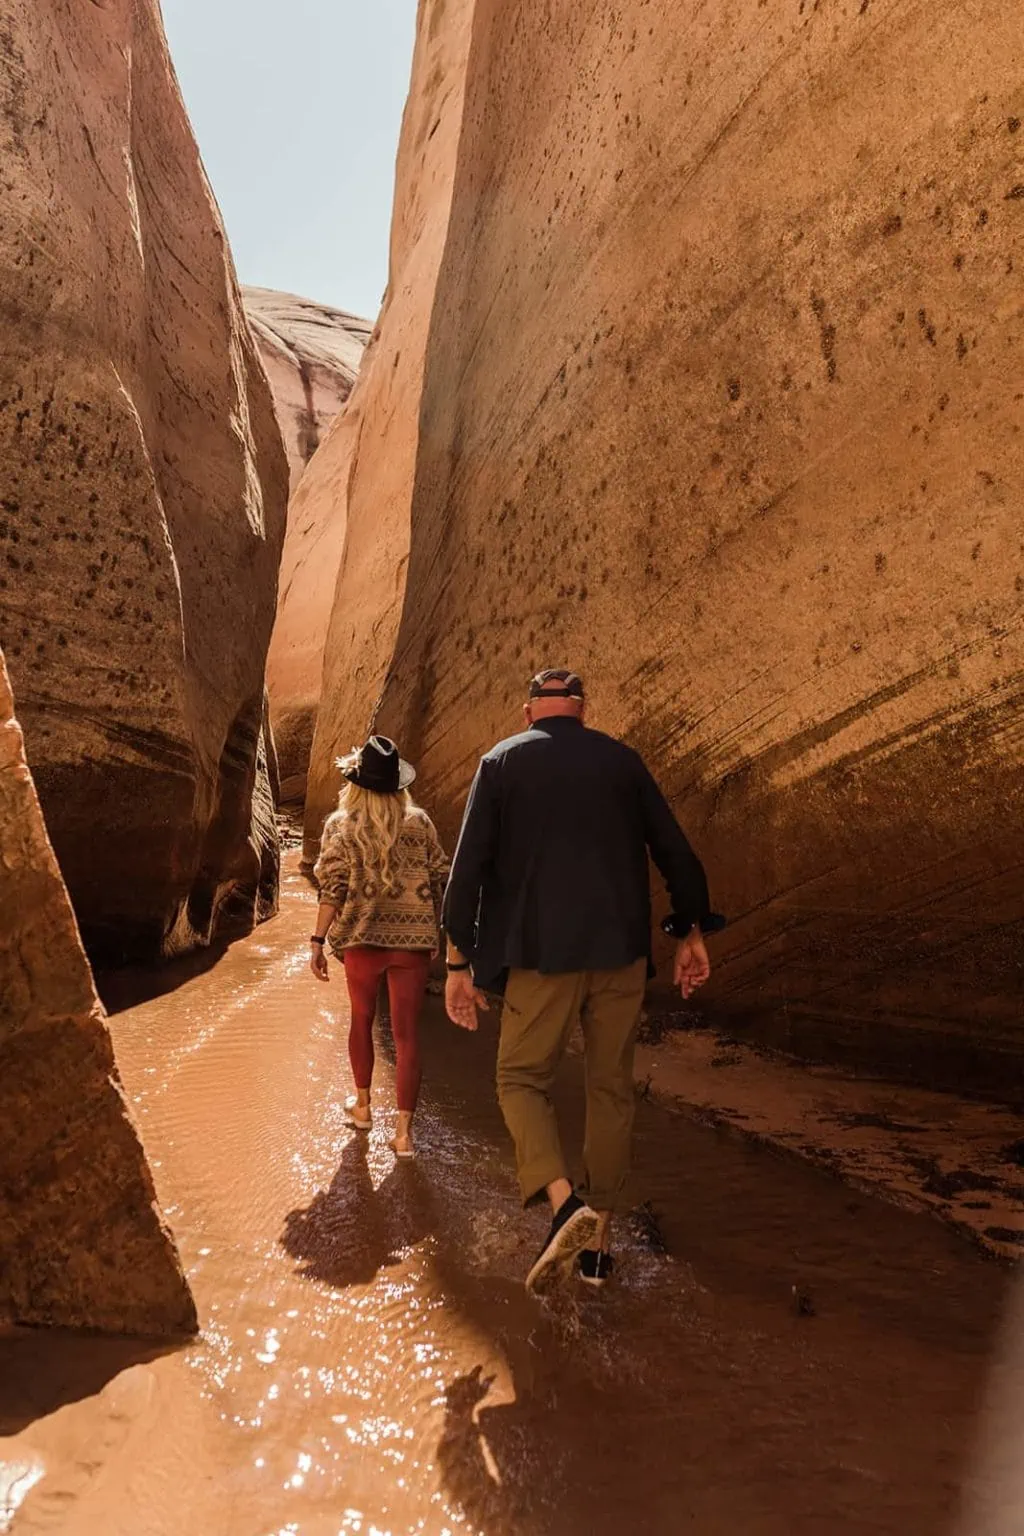 A couple walks together through water in a red rock slot canyon.